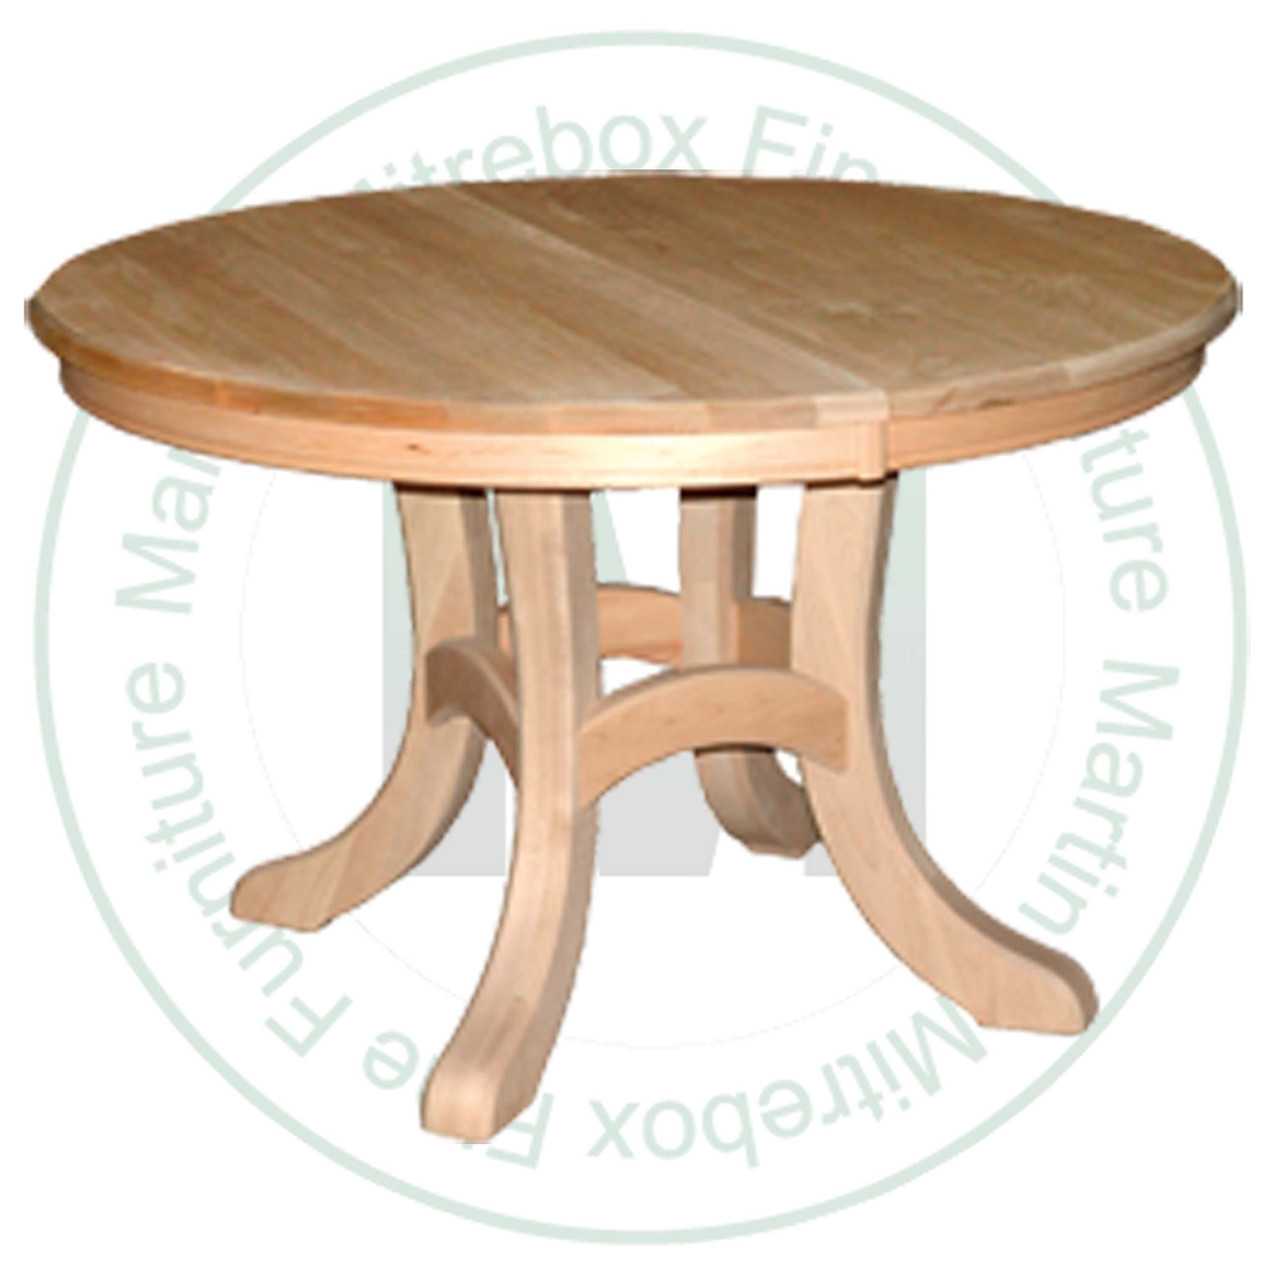 Oak Cairo Single Pedestal Table 42''D x 54''W x 30''H Round Solid Top Table